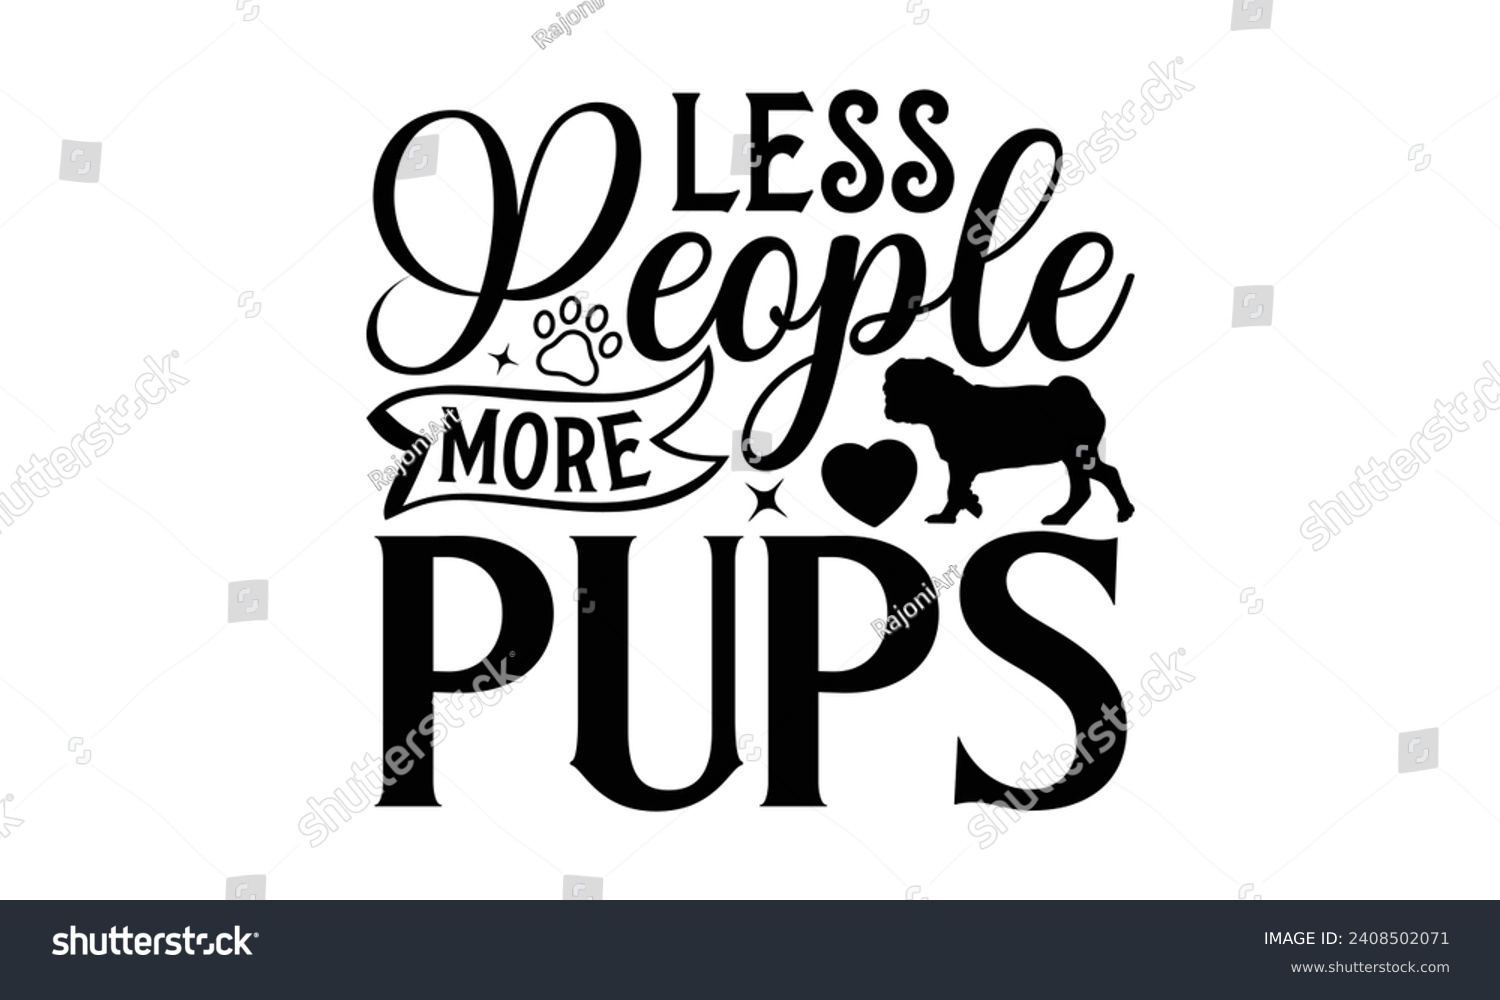 SVG of Less People More Pups - Dog T-shirt Design, Vector illustration with hand drawn lettering, Silhouette Cameo, Cricut, Modern calligraphy, Mugs, Notebooks, white background. svg